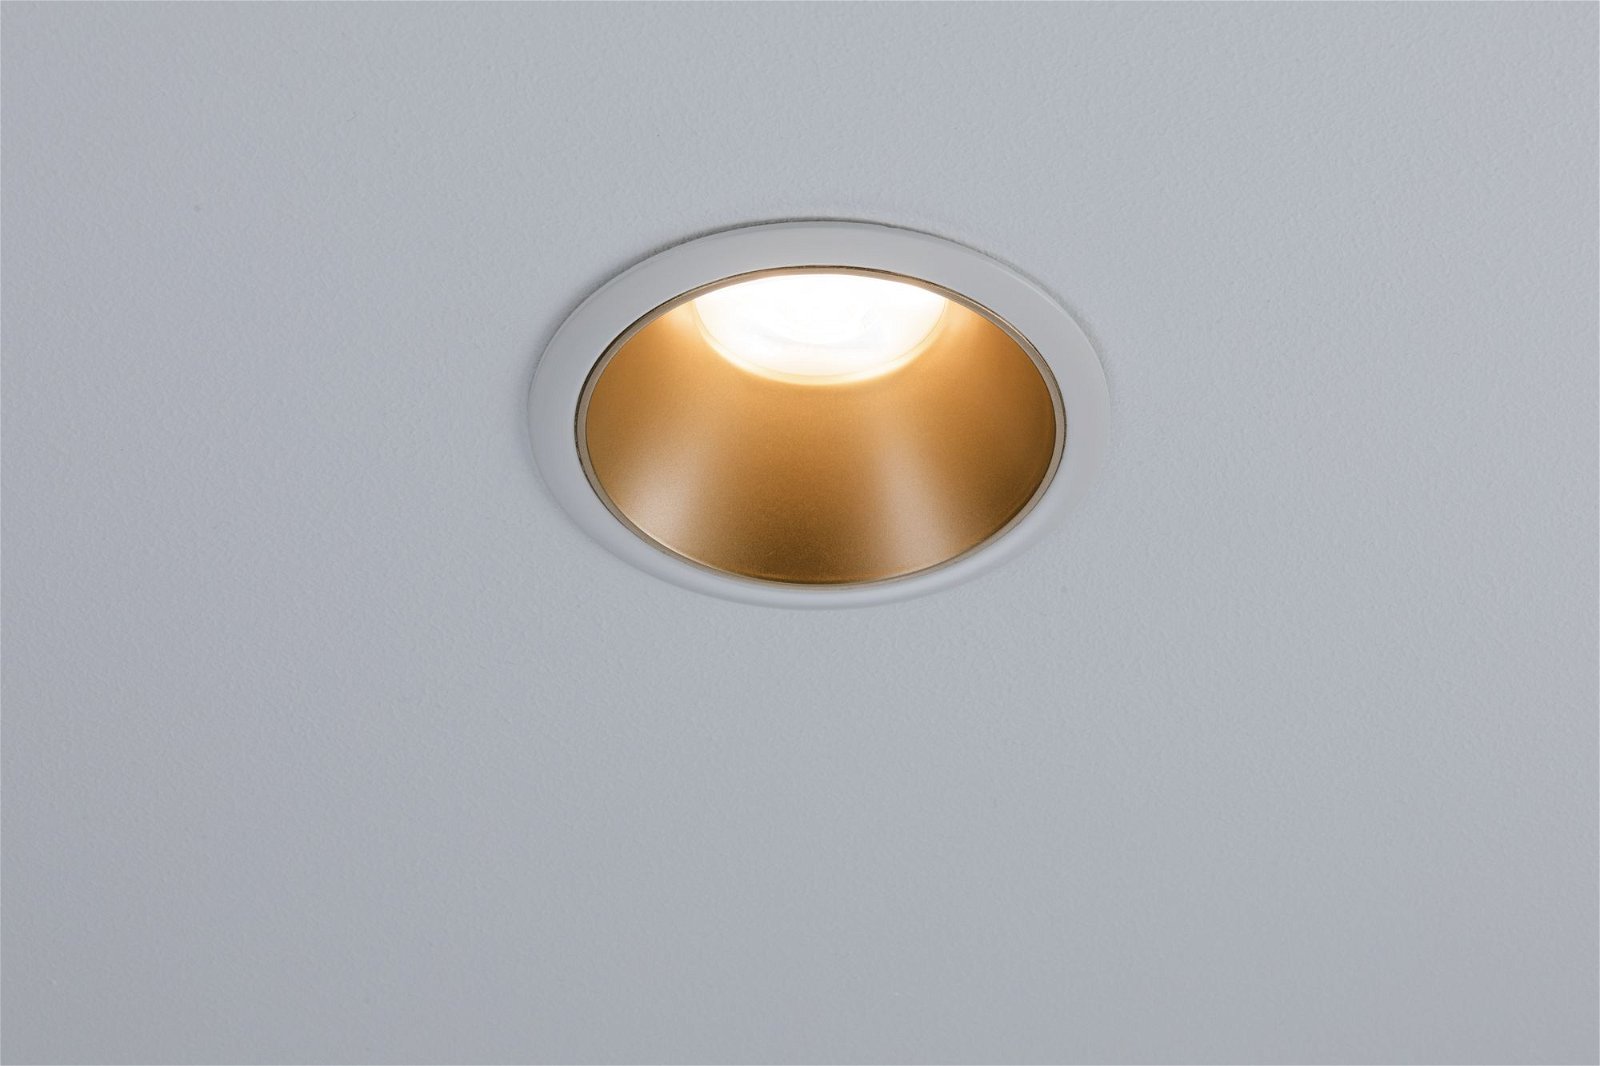 Recessed luminaire Cole round 88mm GU10 max. 10W 230V dimmable Matt white/Gold